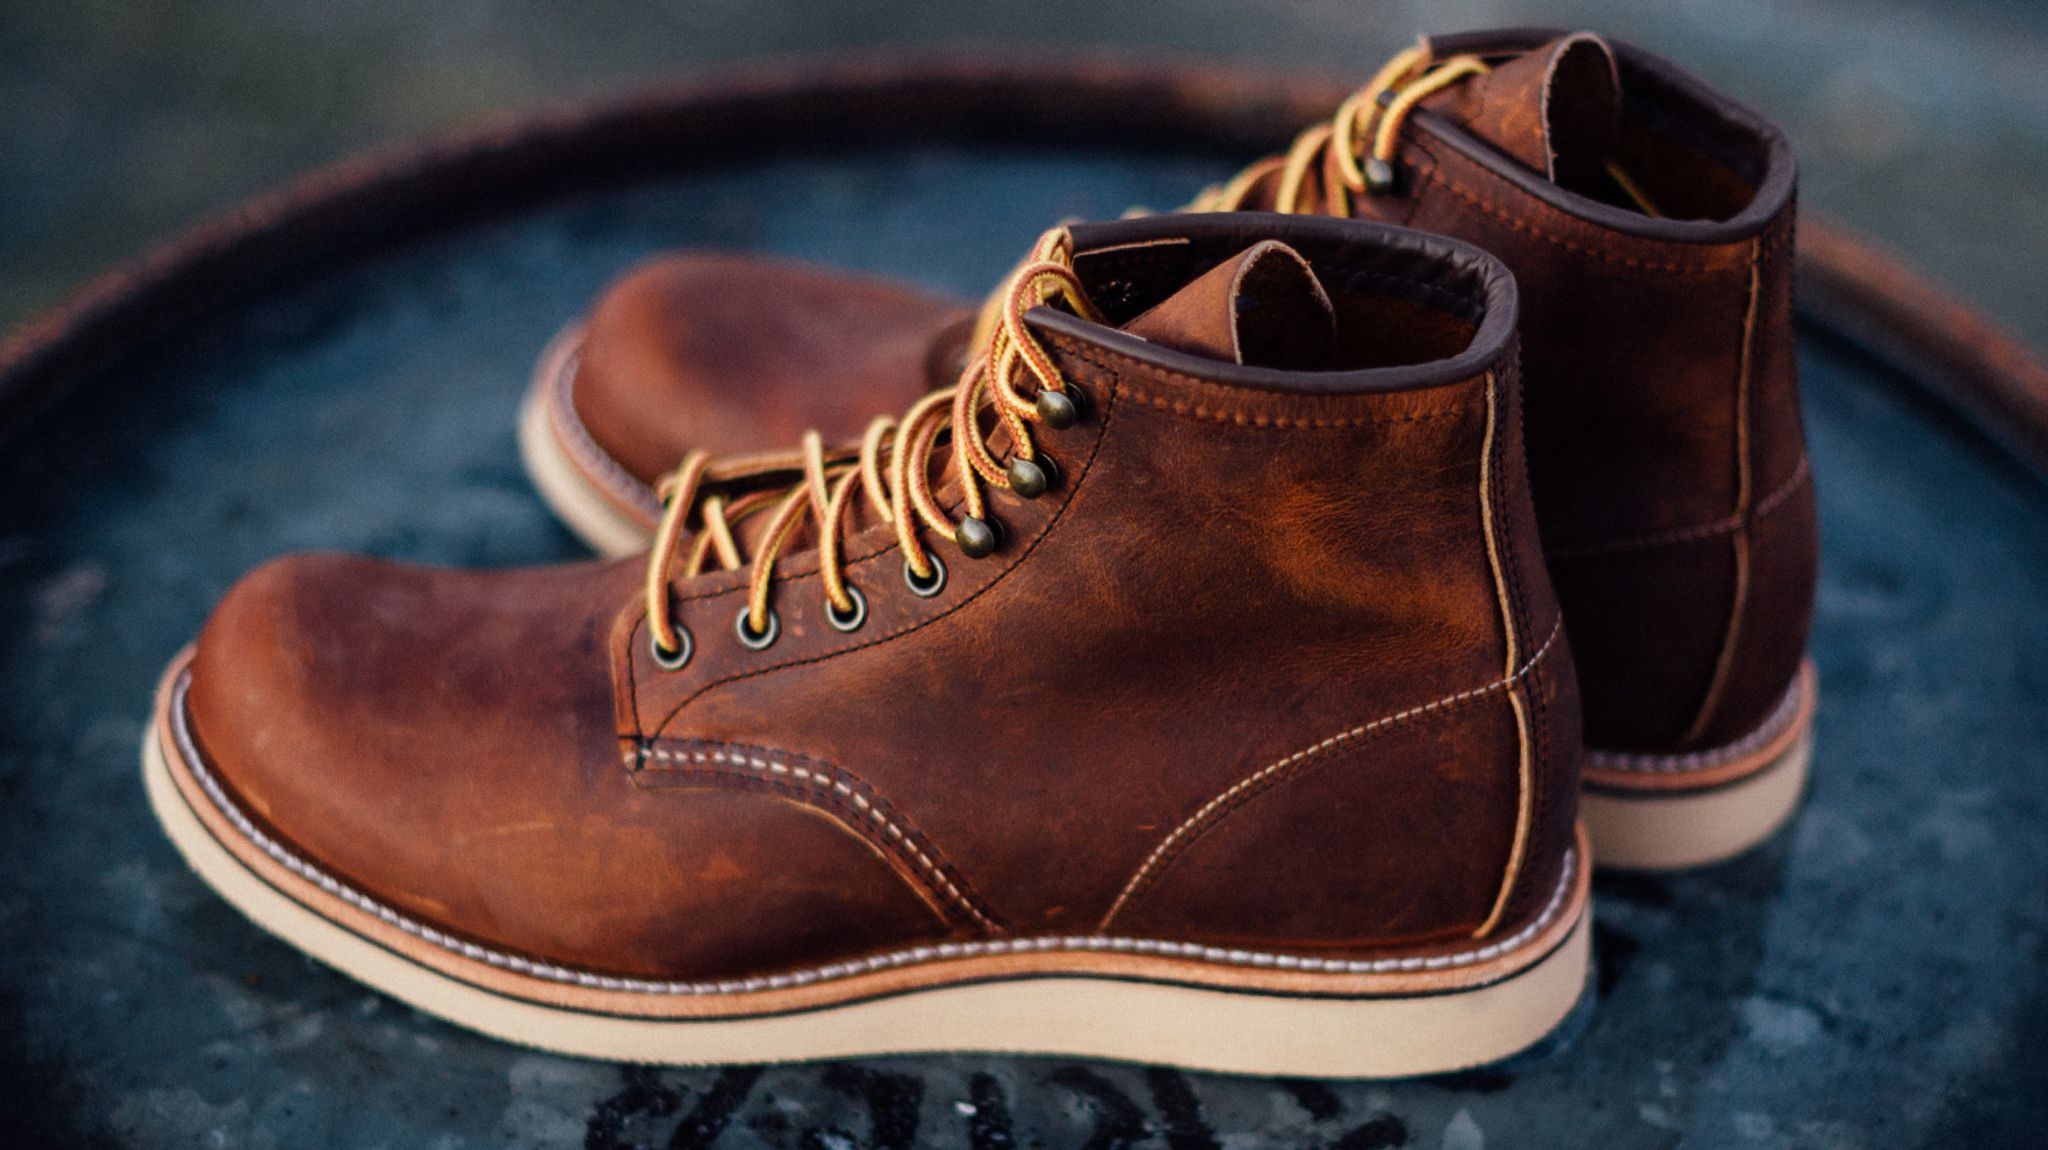 red wing boots wide feet